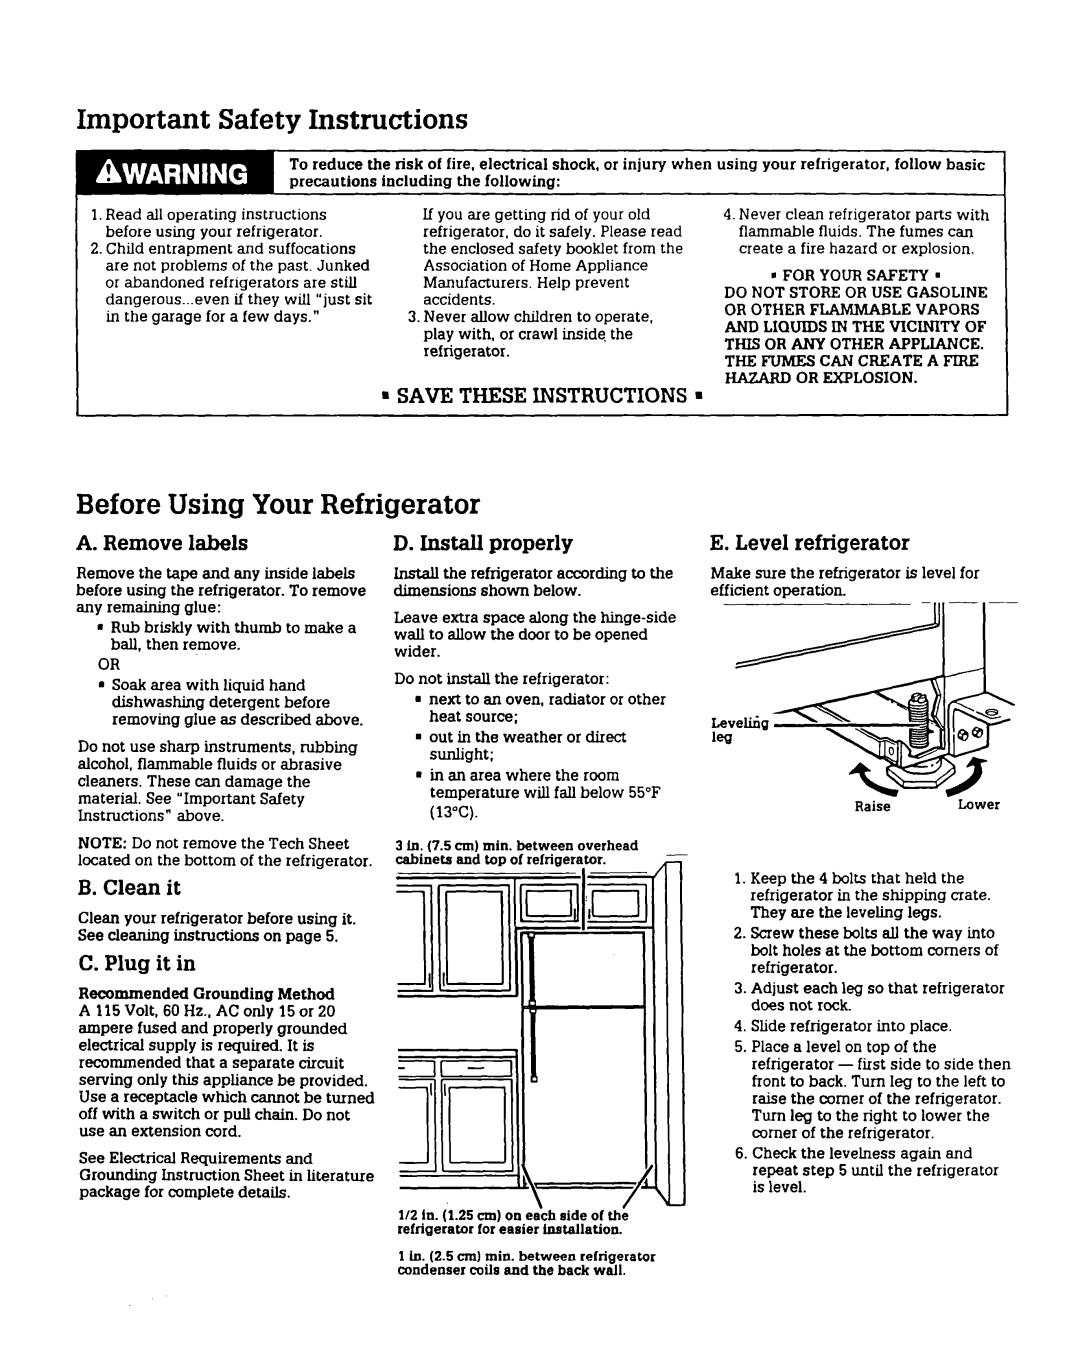 Whirlpool RT12FC Important Safety Instructions, Before Using Your Refrigerator, SAVE THESE INSTRUCTIONS m, B. Clean it 